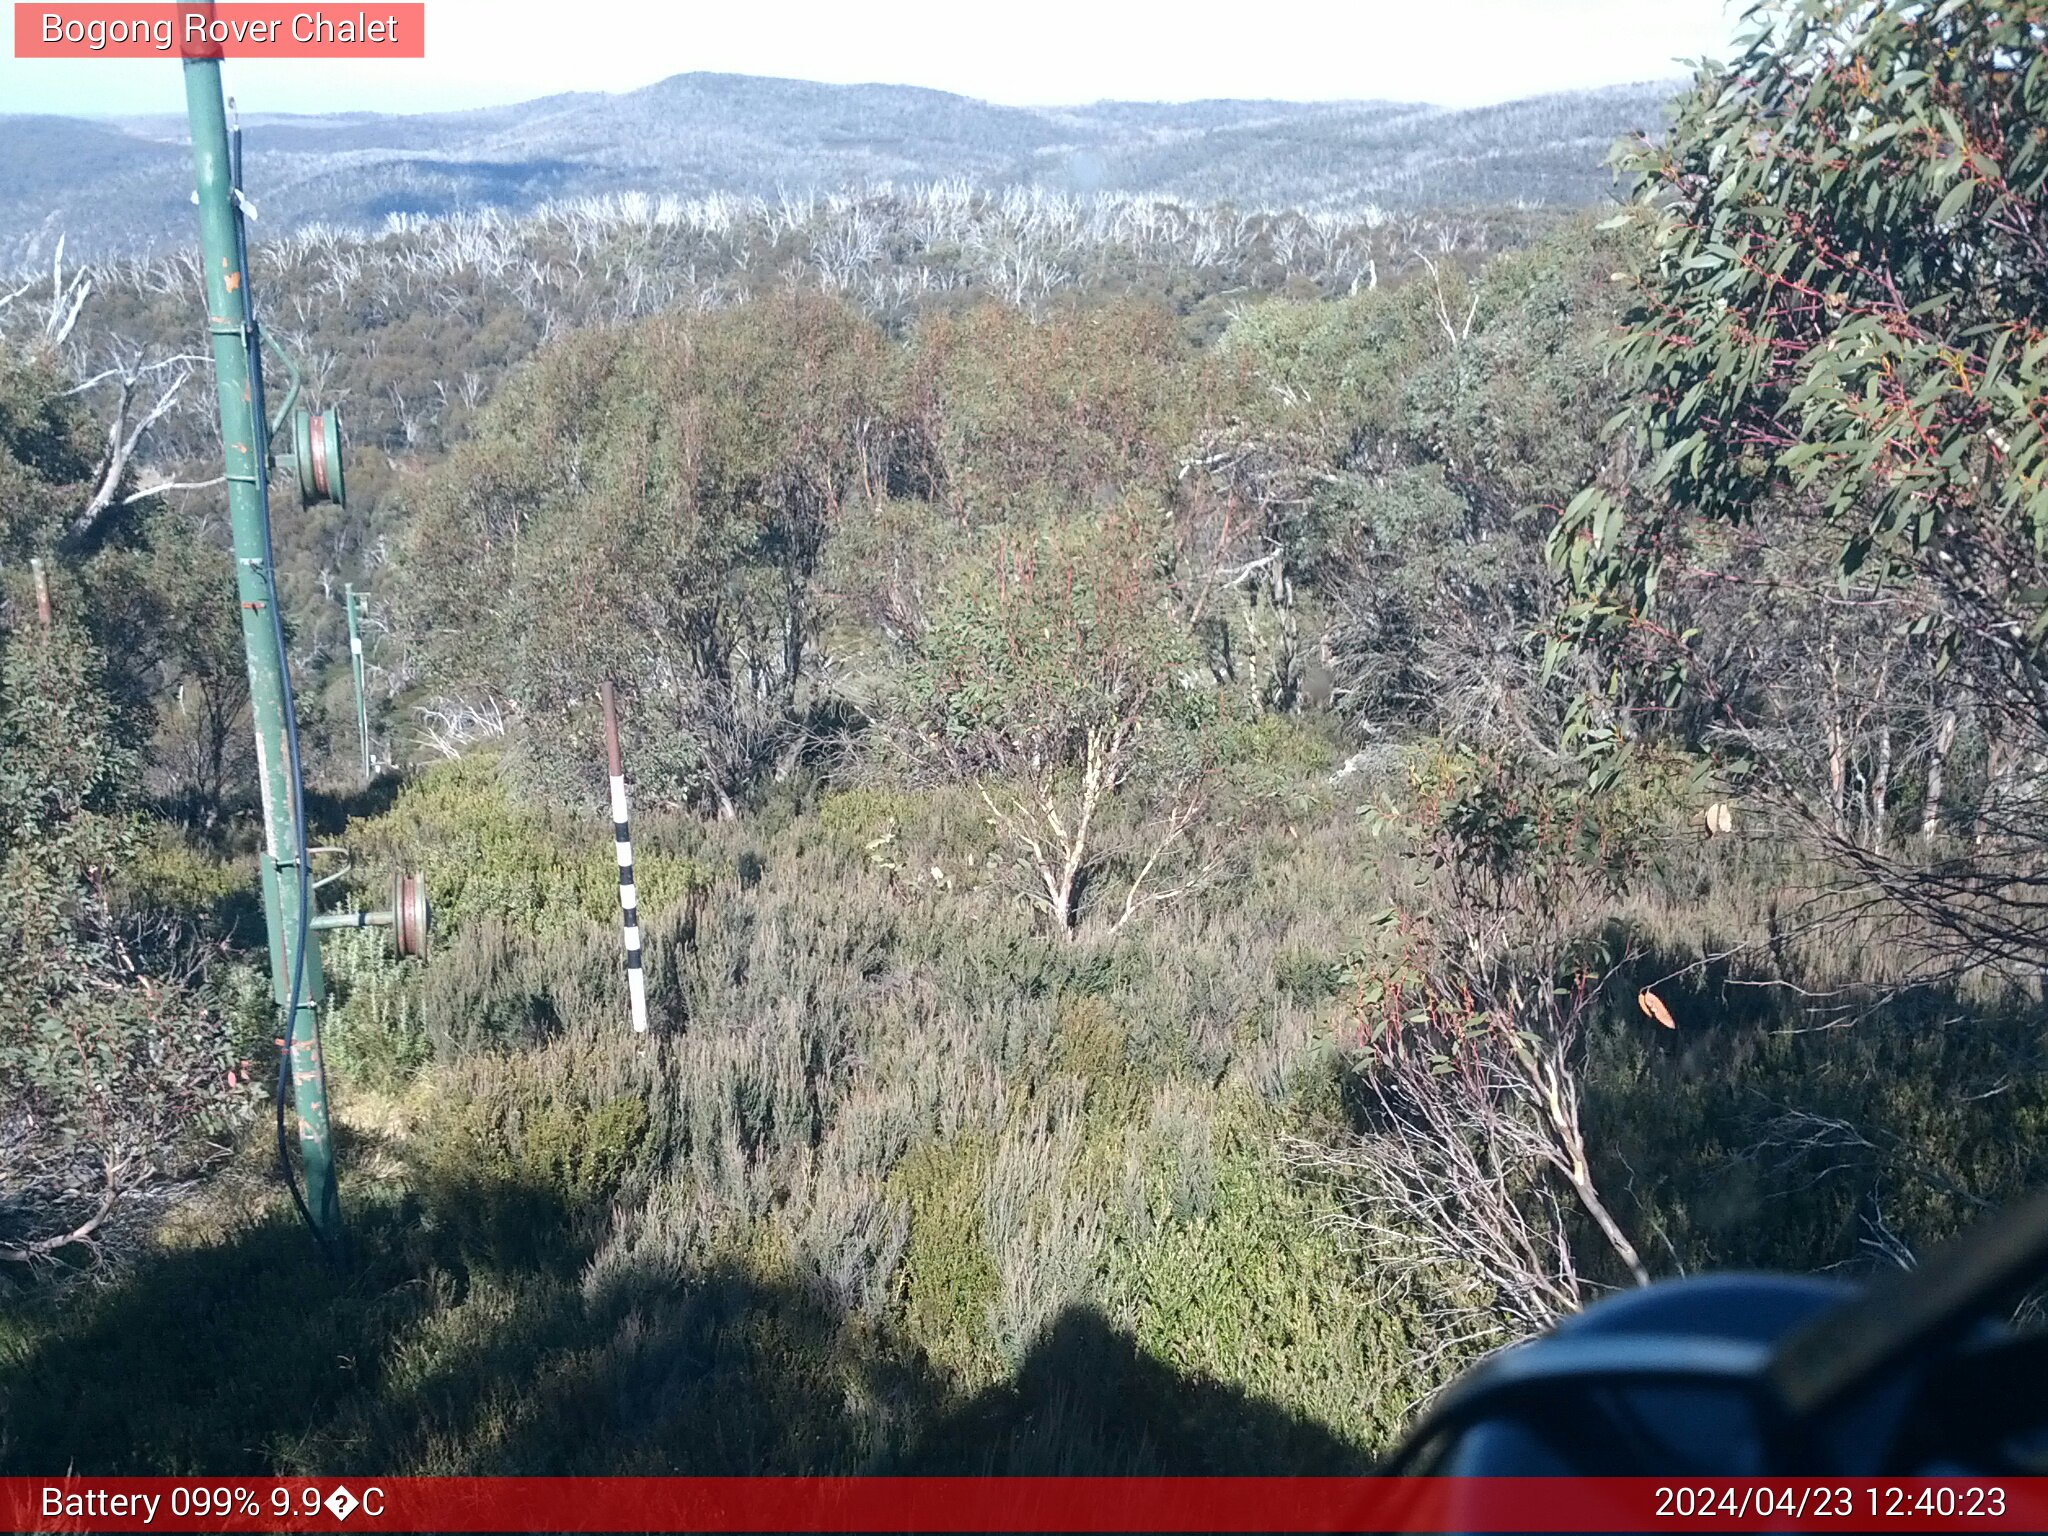 Bogong Web Cam 12:40pm Tuesday 23rd of April 2024